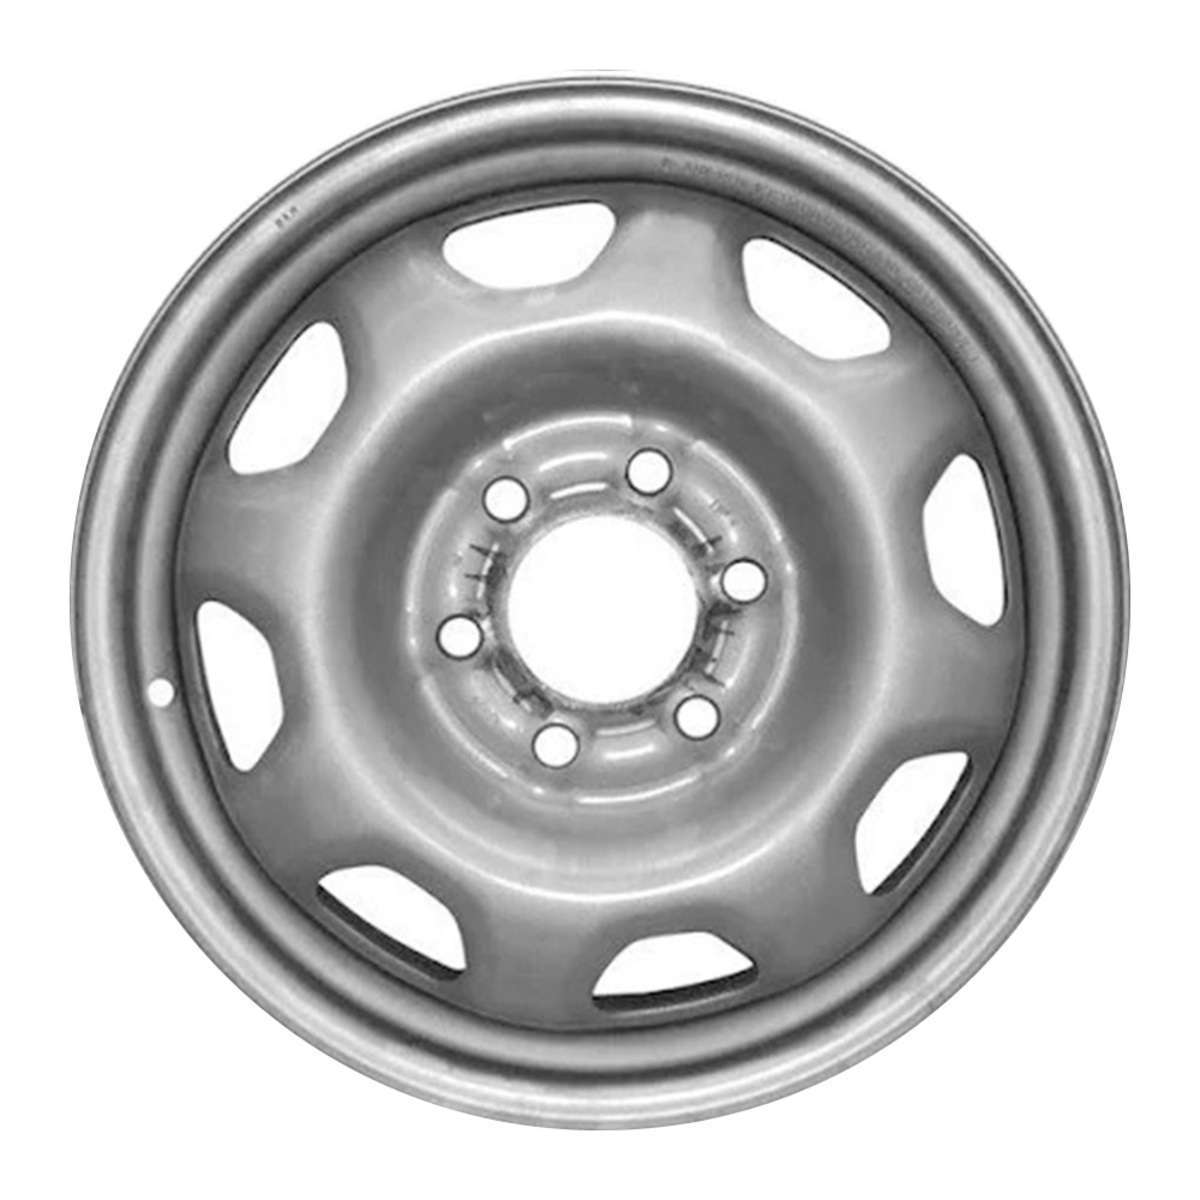 2020 Ford F-150 New 17" Replacement Wheel Rim RW3996S